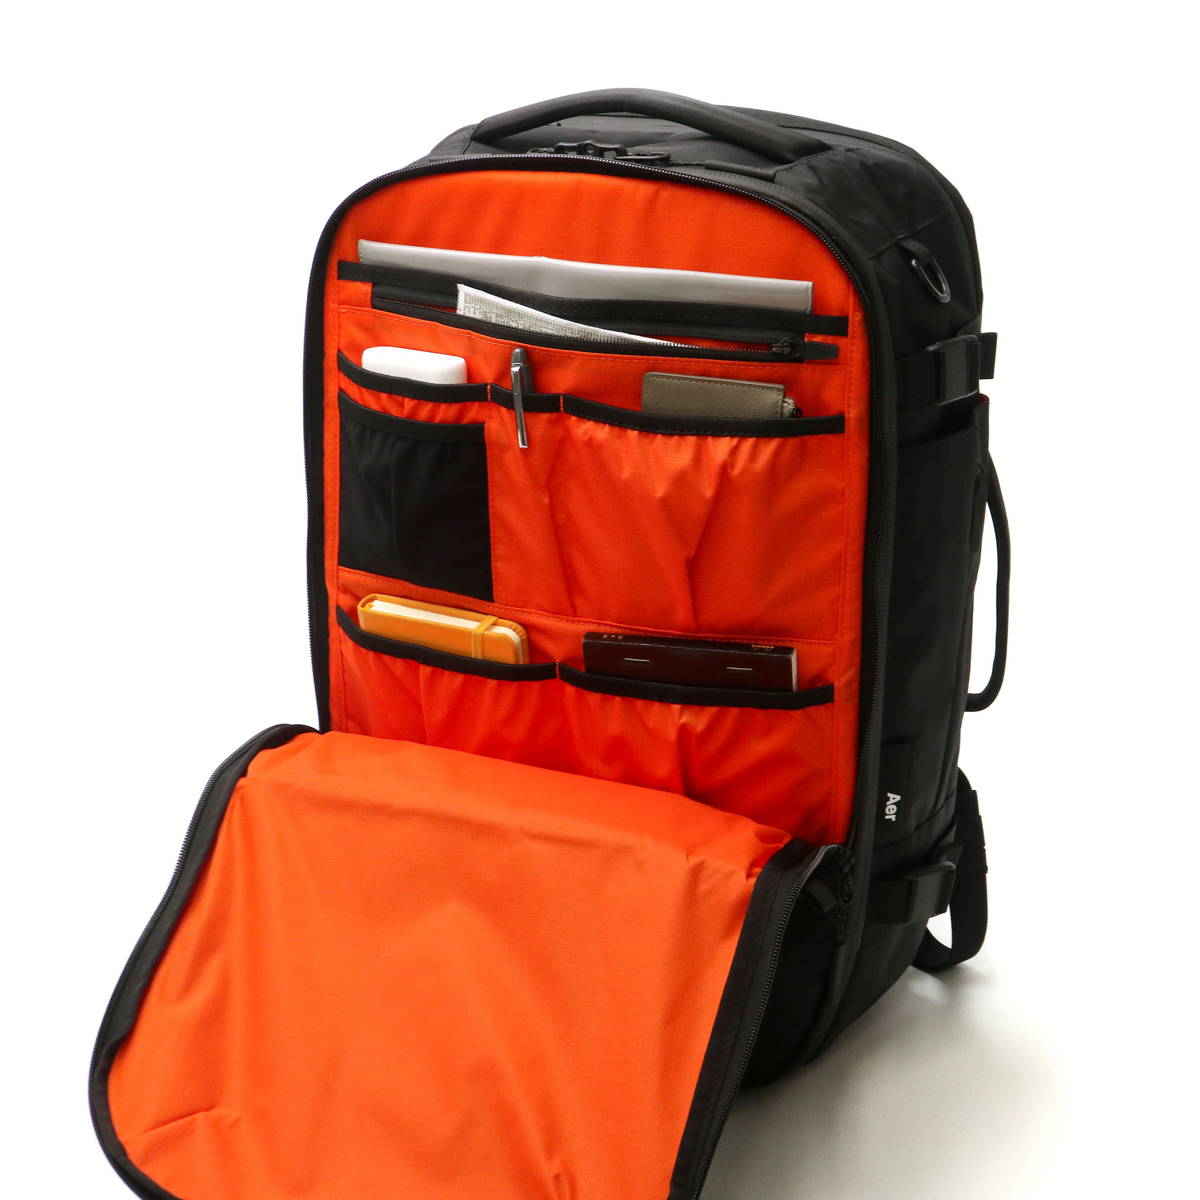 Aer エアー Travel Collection Travel Pack 3 X-Pac バックパック 35L 